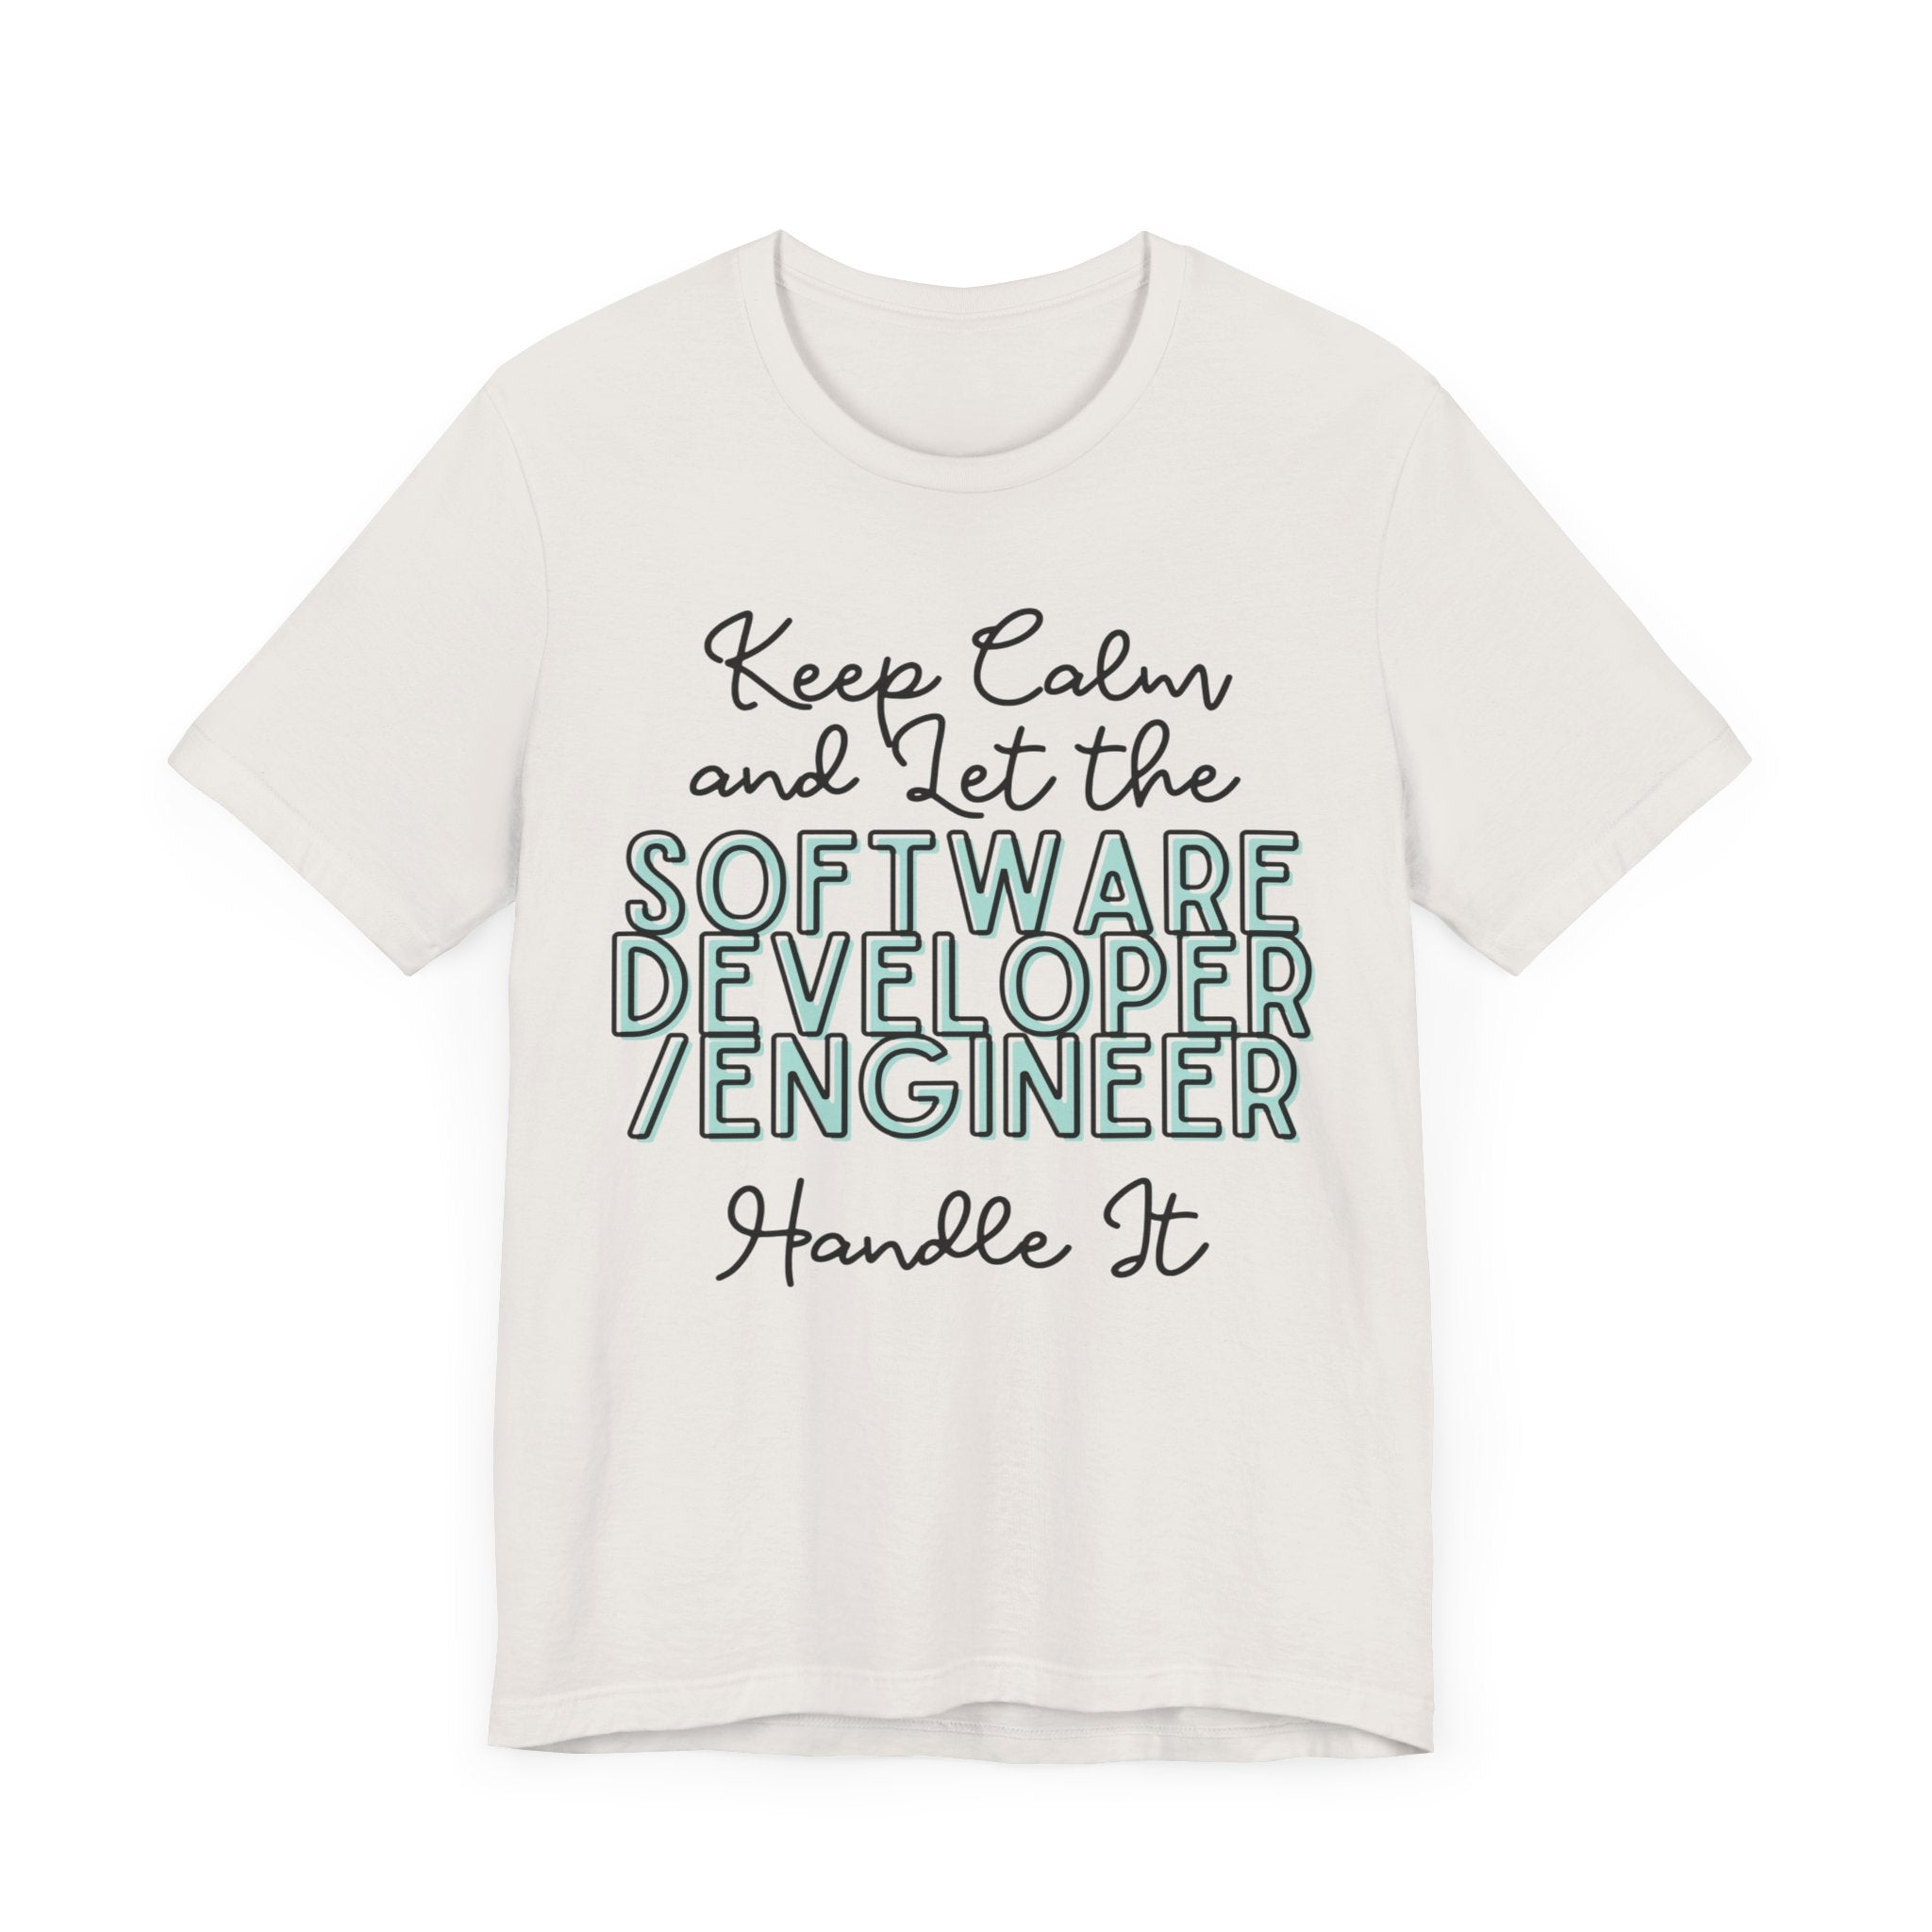 Keep Calm and let the Software Developer / Engineer handle It - Jersey Short Sleeve Tee